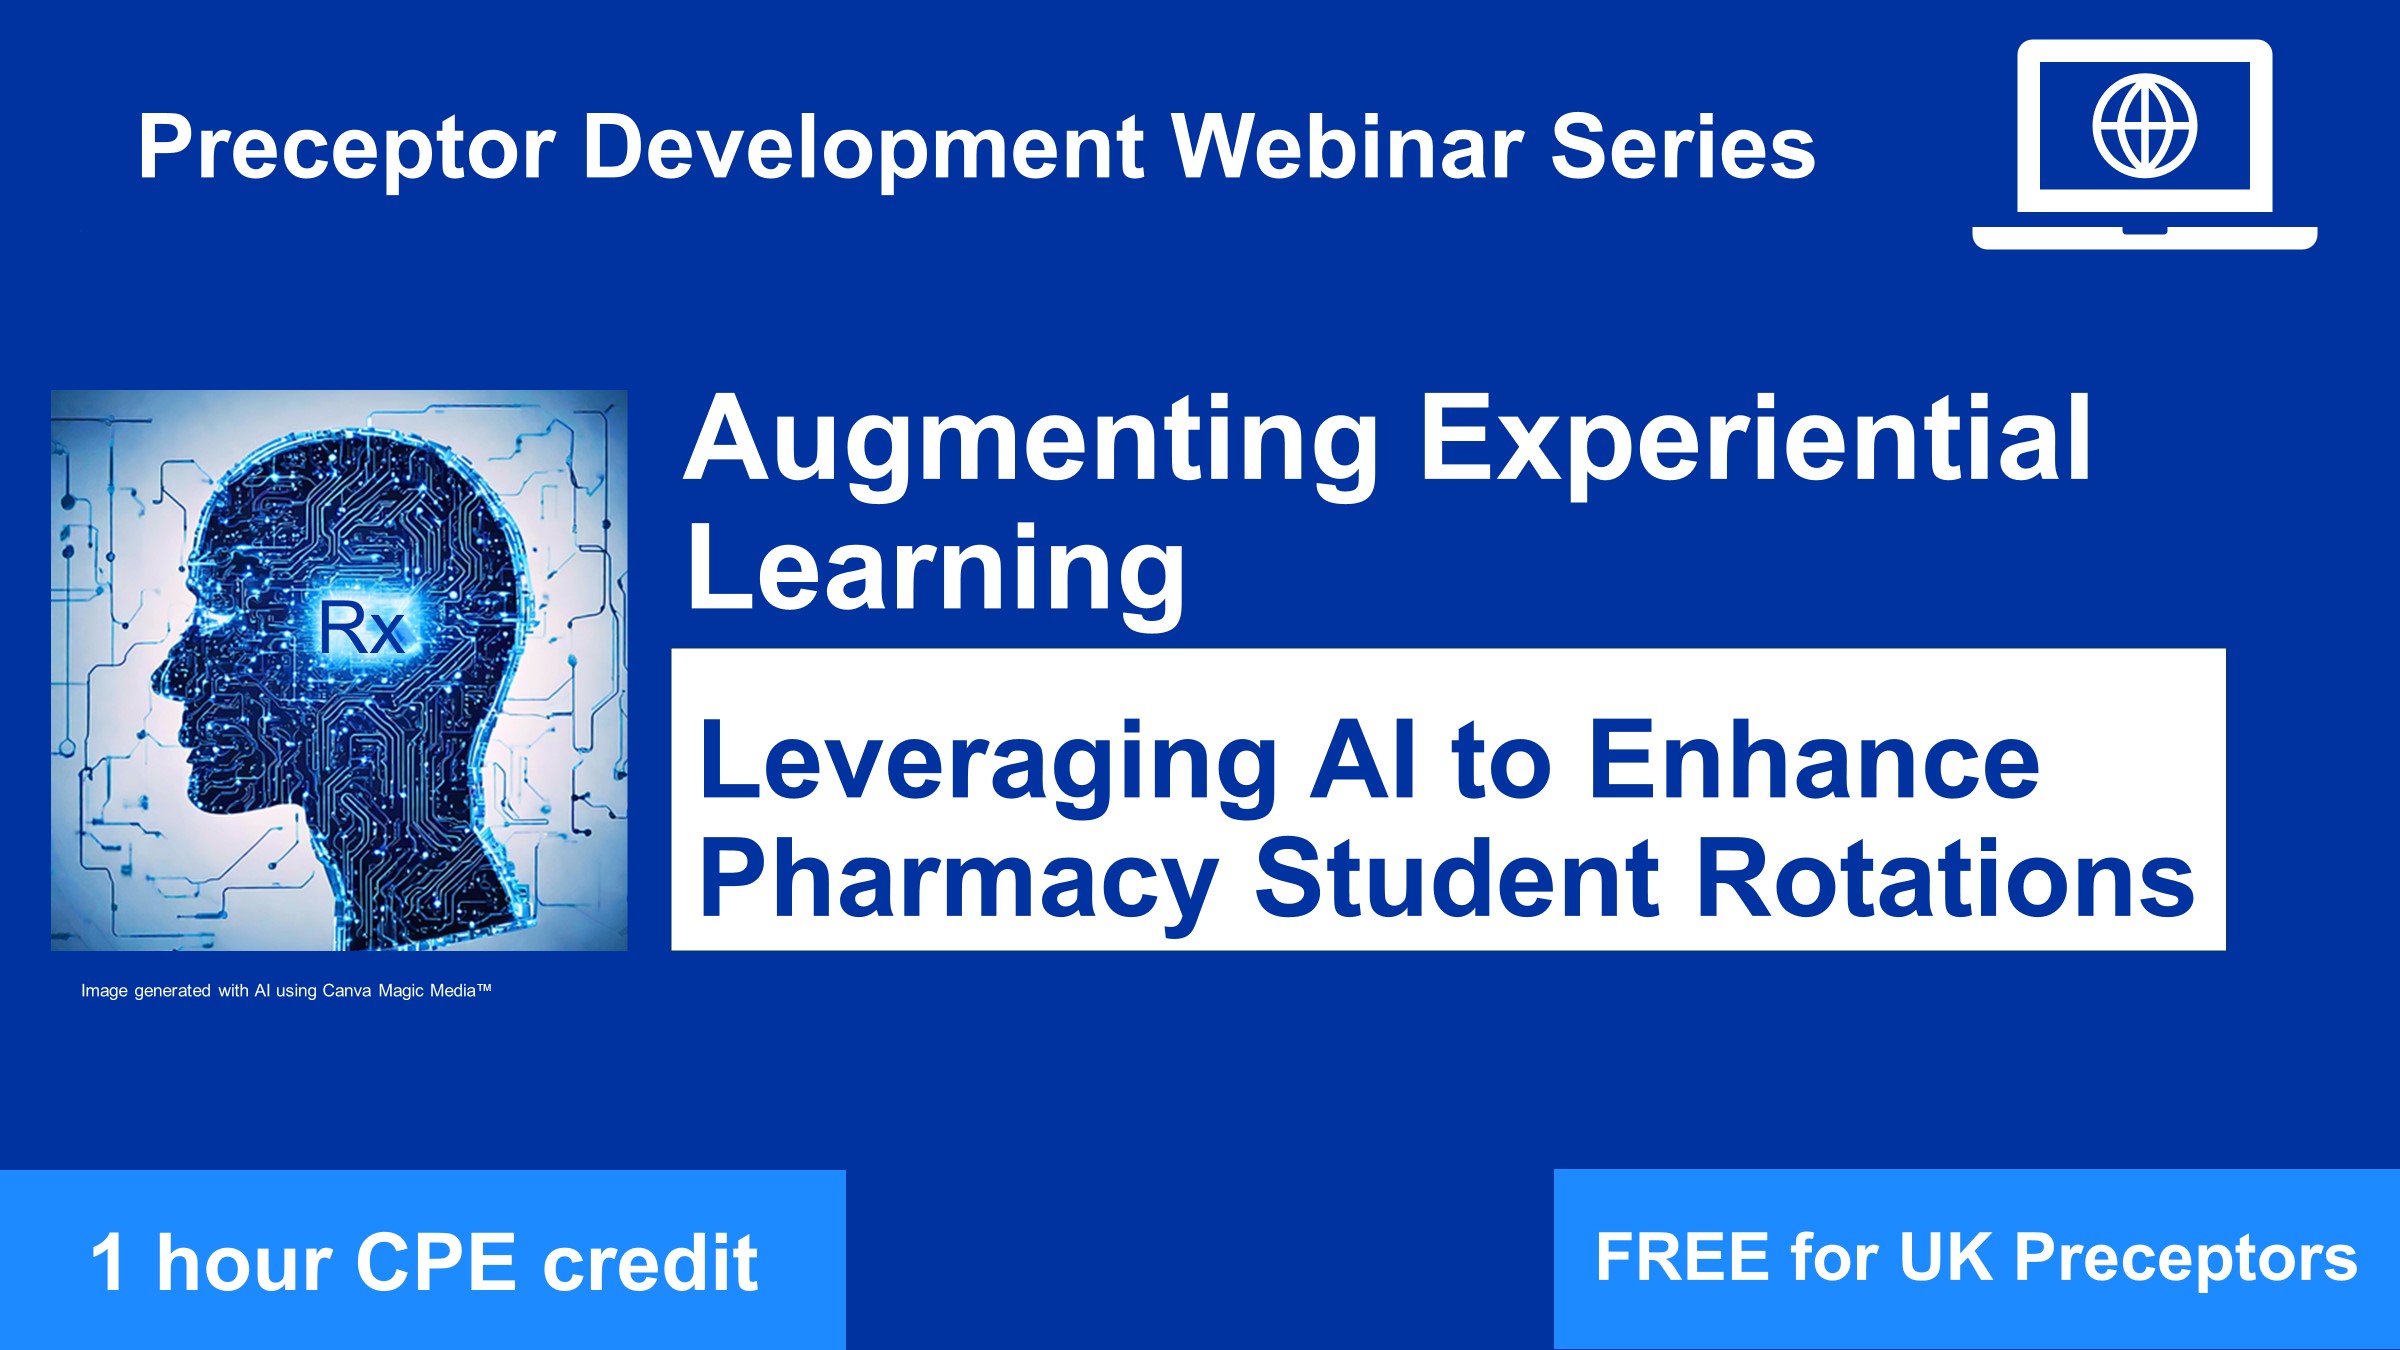 ON DEMAND WEBINAR | Augmenting Experiential Learning: Leveraging AI to Enhance Pharmacy Student Rotations